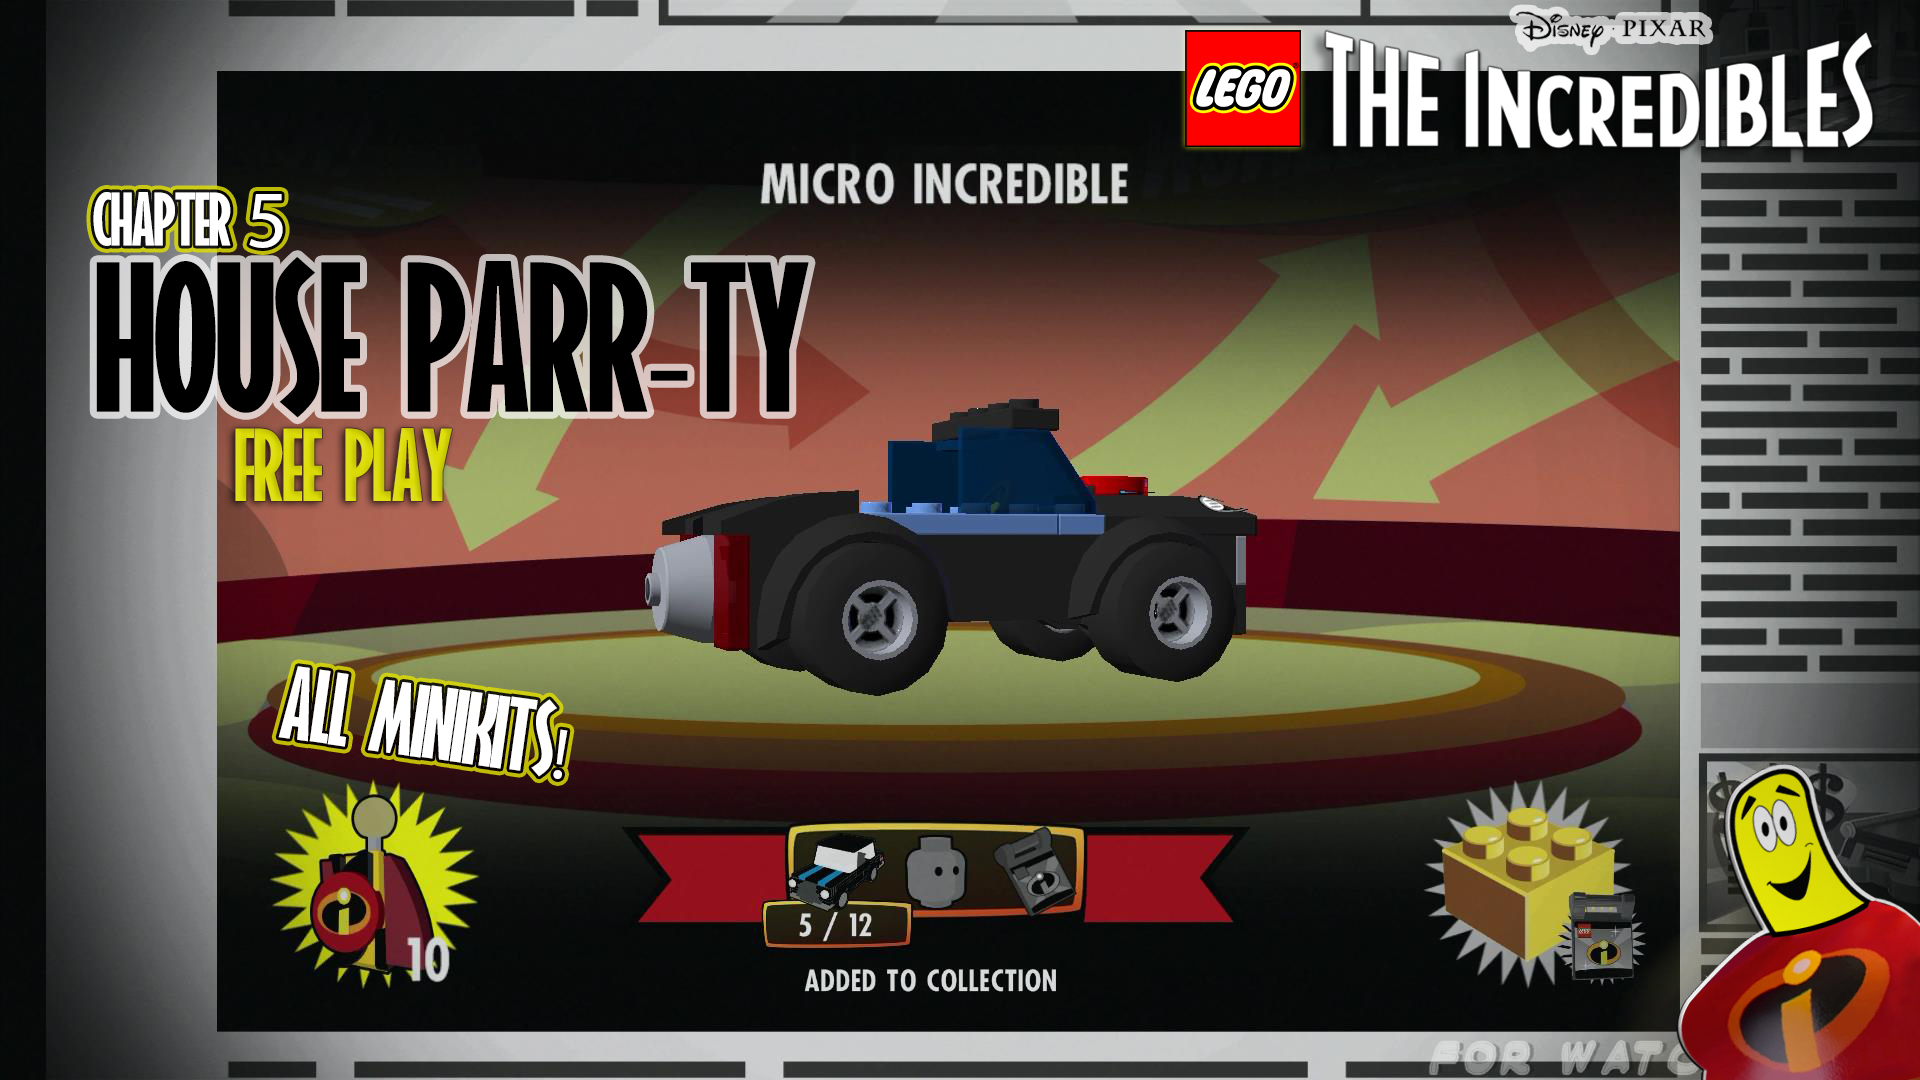 Lego The Incredibles: House Parr-ty FREE PLAY (All 10 Minikits) – HTG